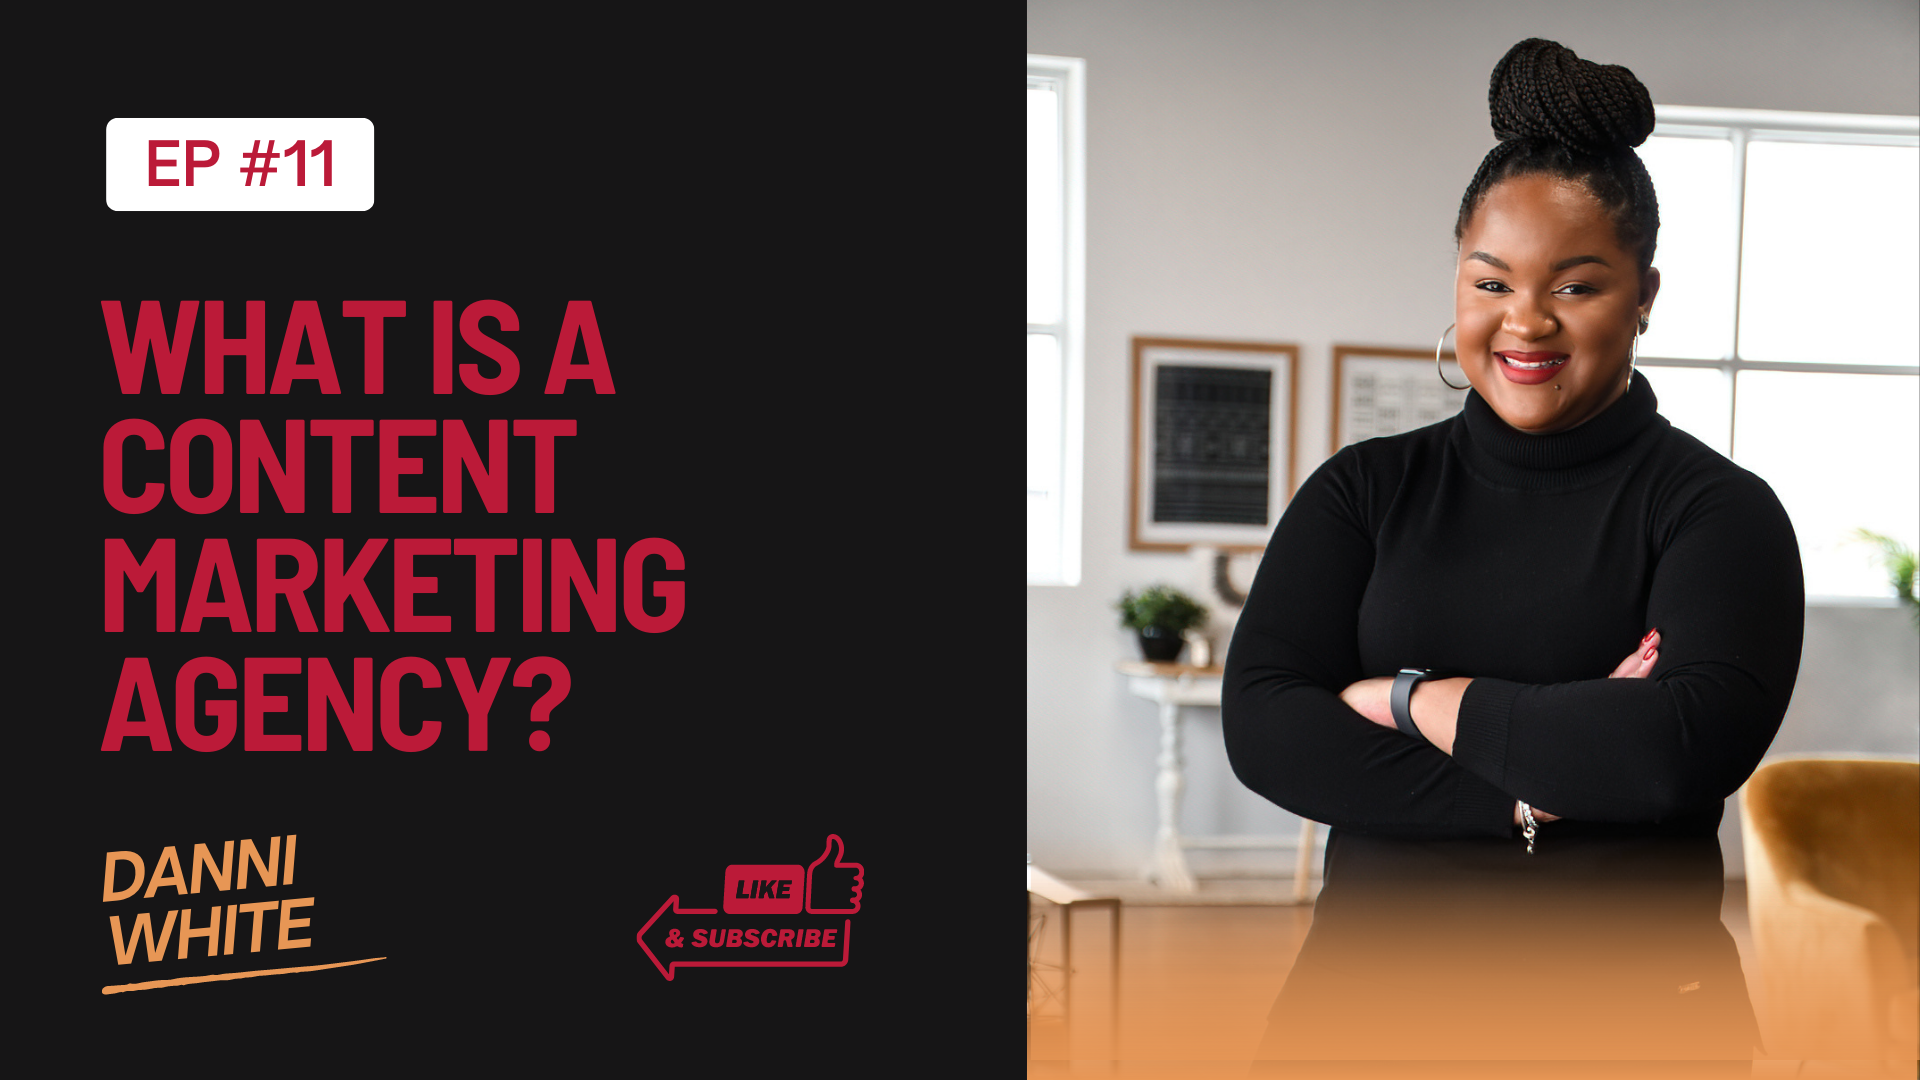 Episode #11: What Is a Content Marketing Agency?